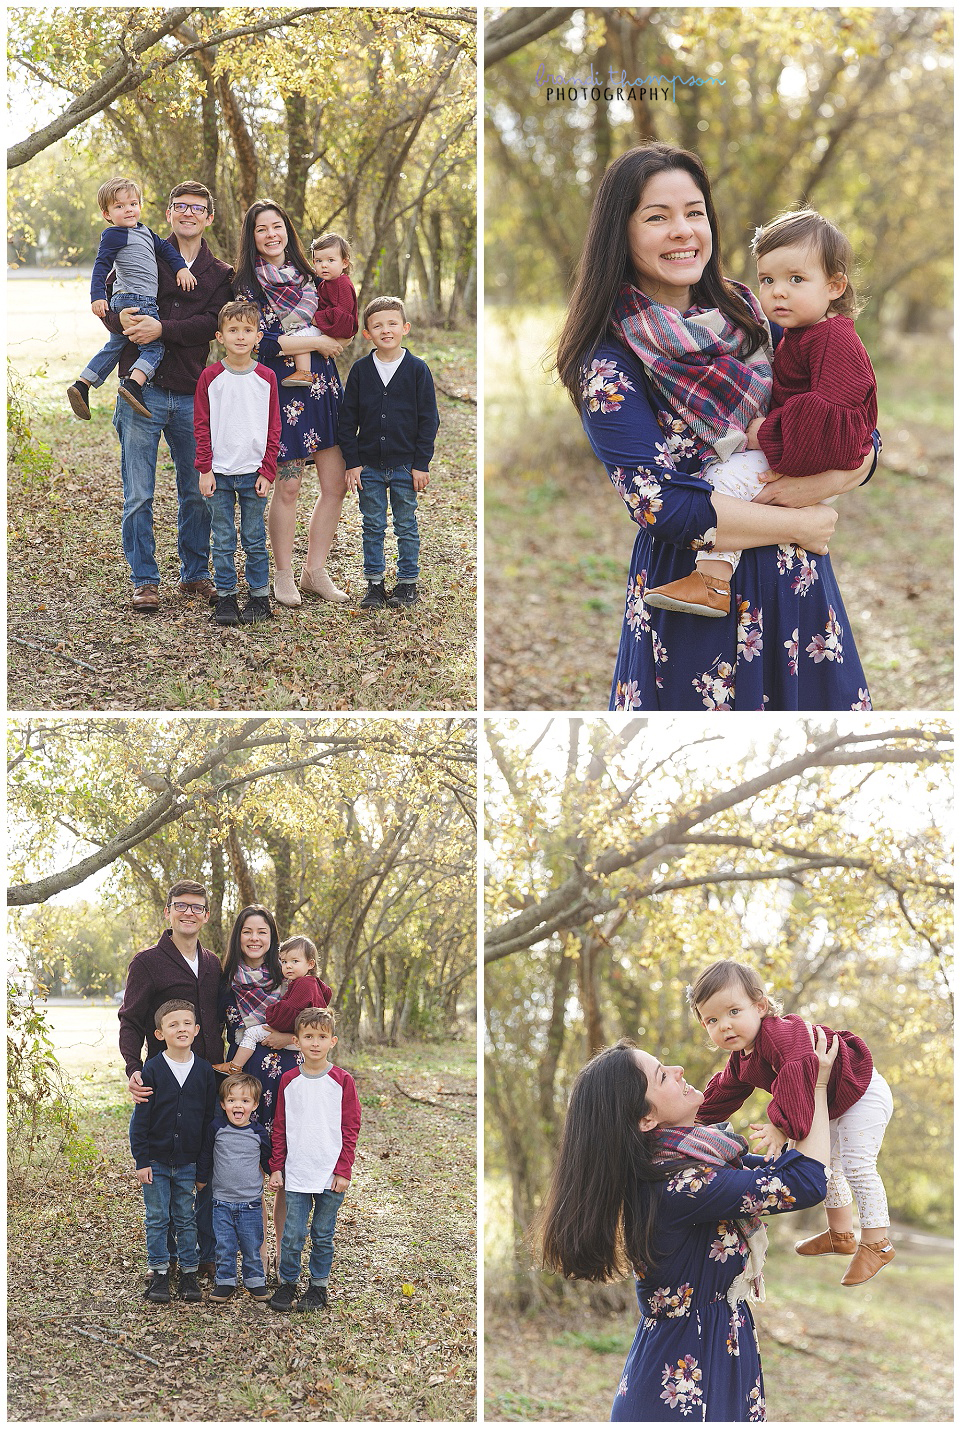 outdoor natural photos of a light skinned family with four young kids, dad, mom, twin school age boys, preschool boy and toddler girl